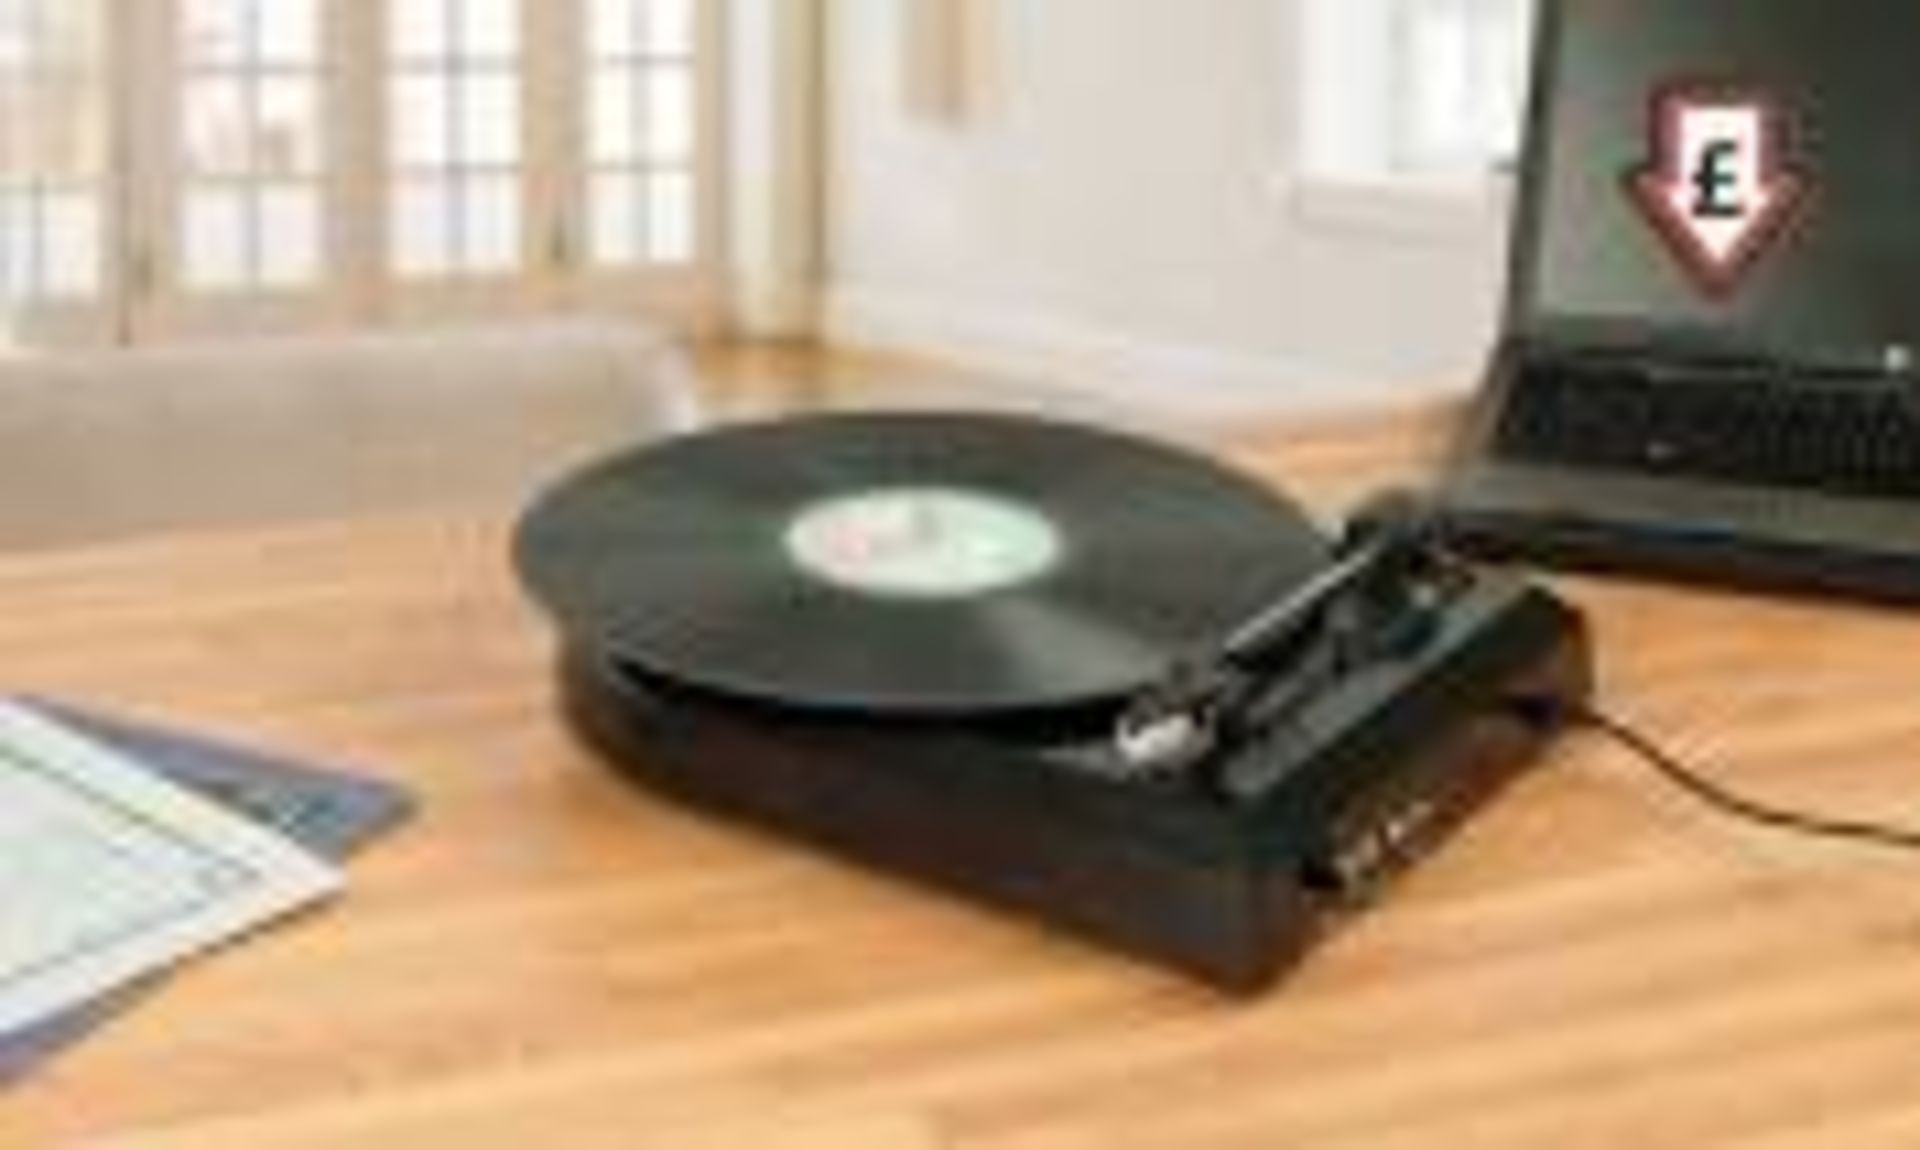 V Brand New Zennox USB Turntable With Built In Speaker With Volume Control Convert LP Records To MP3